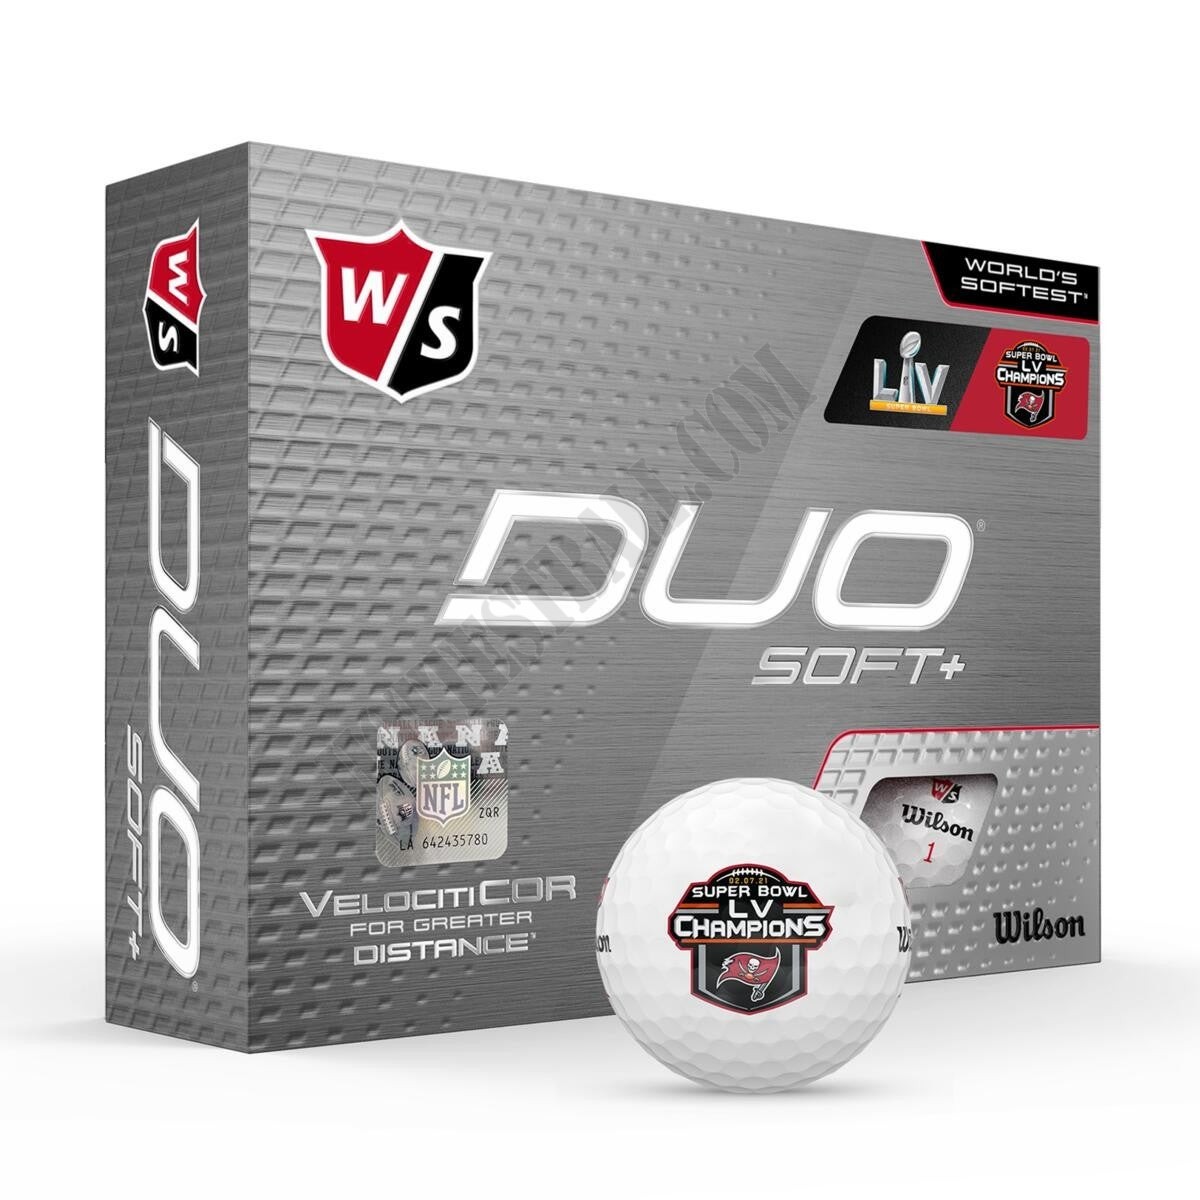 Tampa Bay Buccaneers - DUO Soft+ Super Bowl Championship Golf Balls (12-pack) ● Wilson Promotions - -1